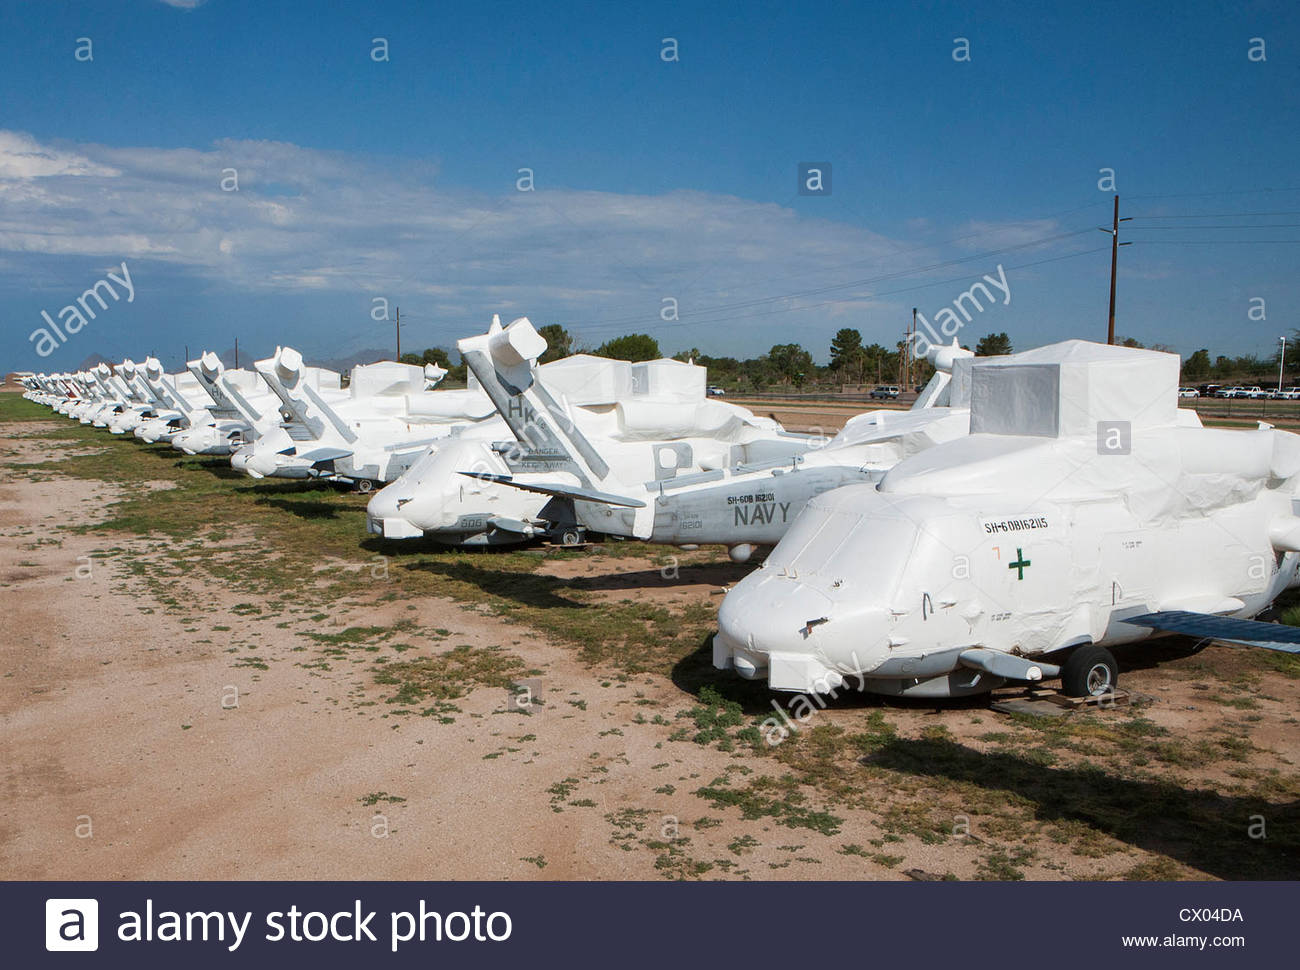 sh-60-seahawk-helicopters-in-storage-at-the-309th-aerospace-maintenance-CX04DA.jpg